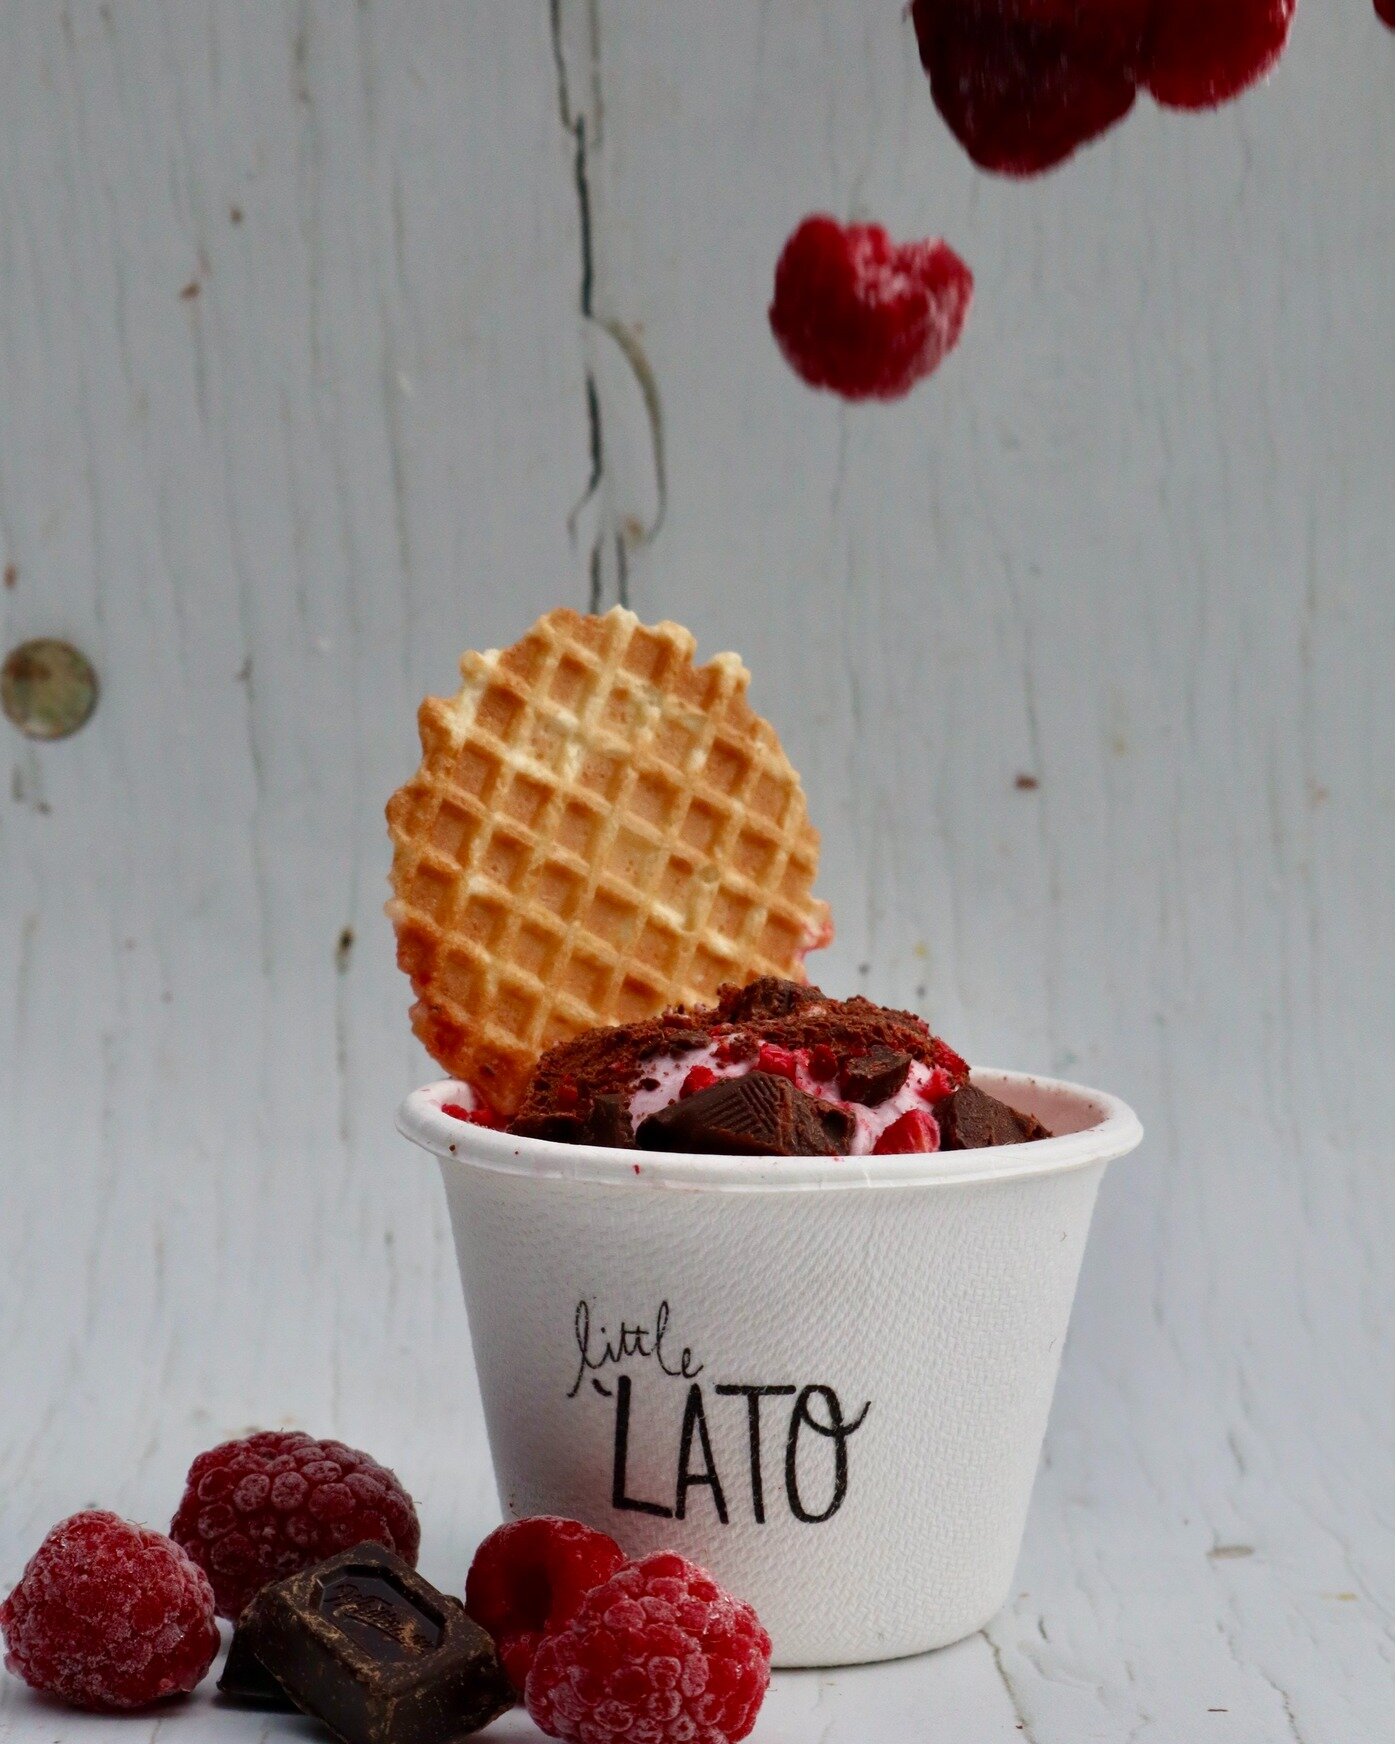 Visit Little 'Lato &rsquo;in their new Hamilton sccop store s at 401 Grey Street, Hamilton East today and you may win a voucher for award-winning Little 'Lato or PRETTY BRAVE. #lovenzgelato #nzicecreamandgelato .
.
.
.
.
.
.
.
.
.
#nzmade #gelato #nz